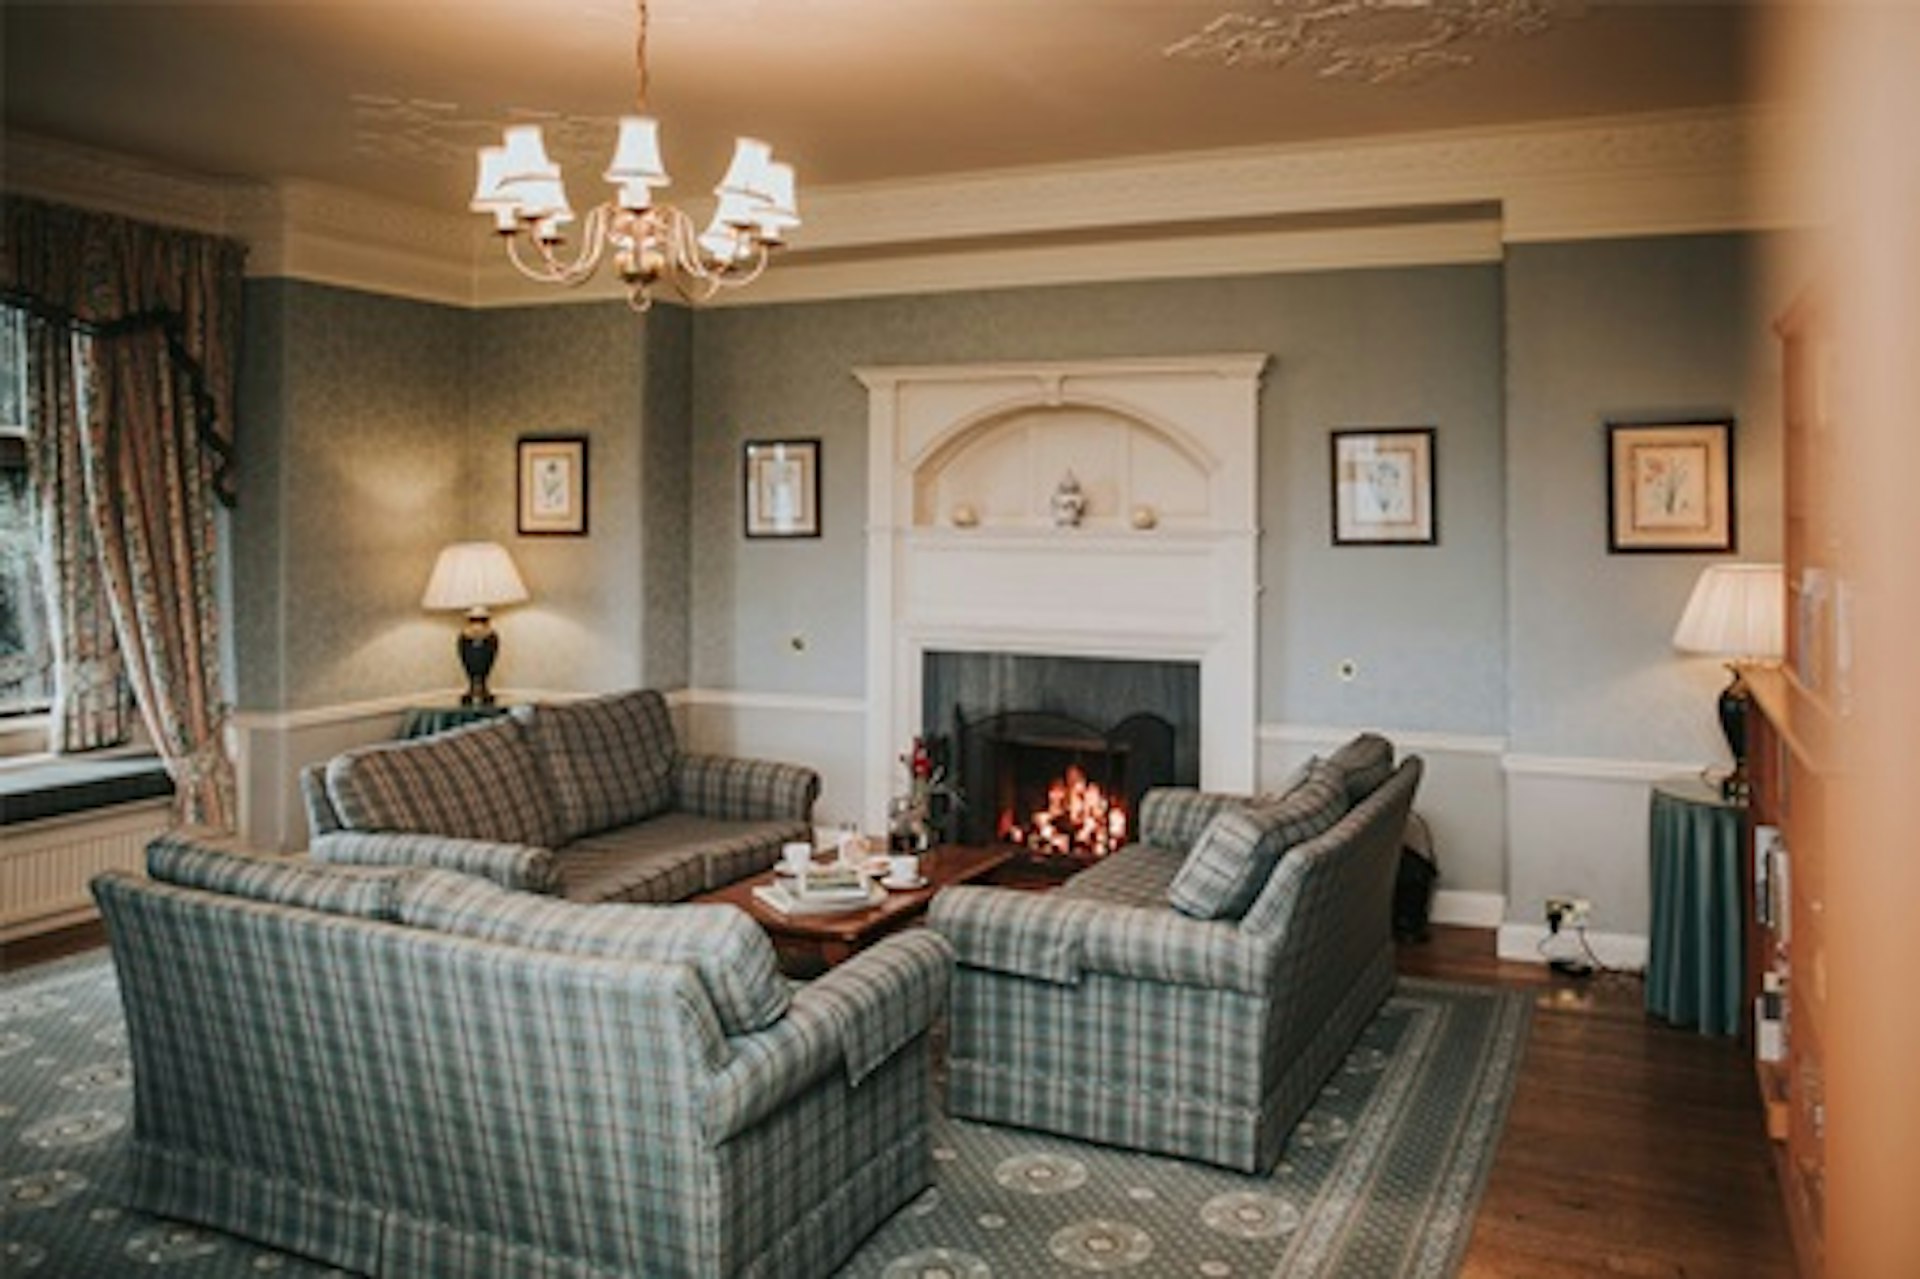 One Night Lake District Break for Two at Cragwood Country House Hotel, Windermere 4